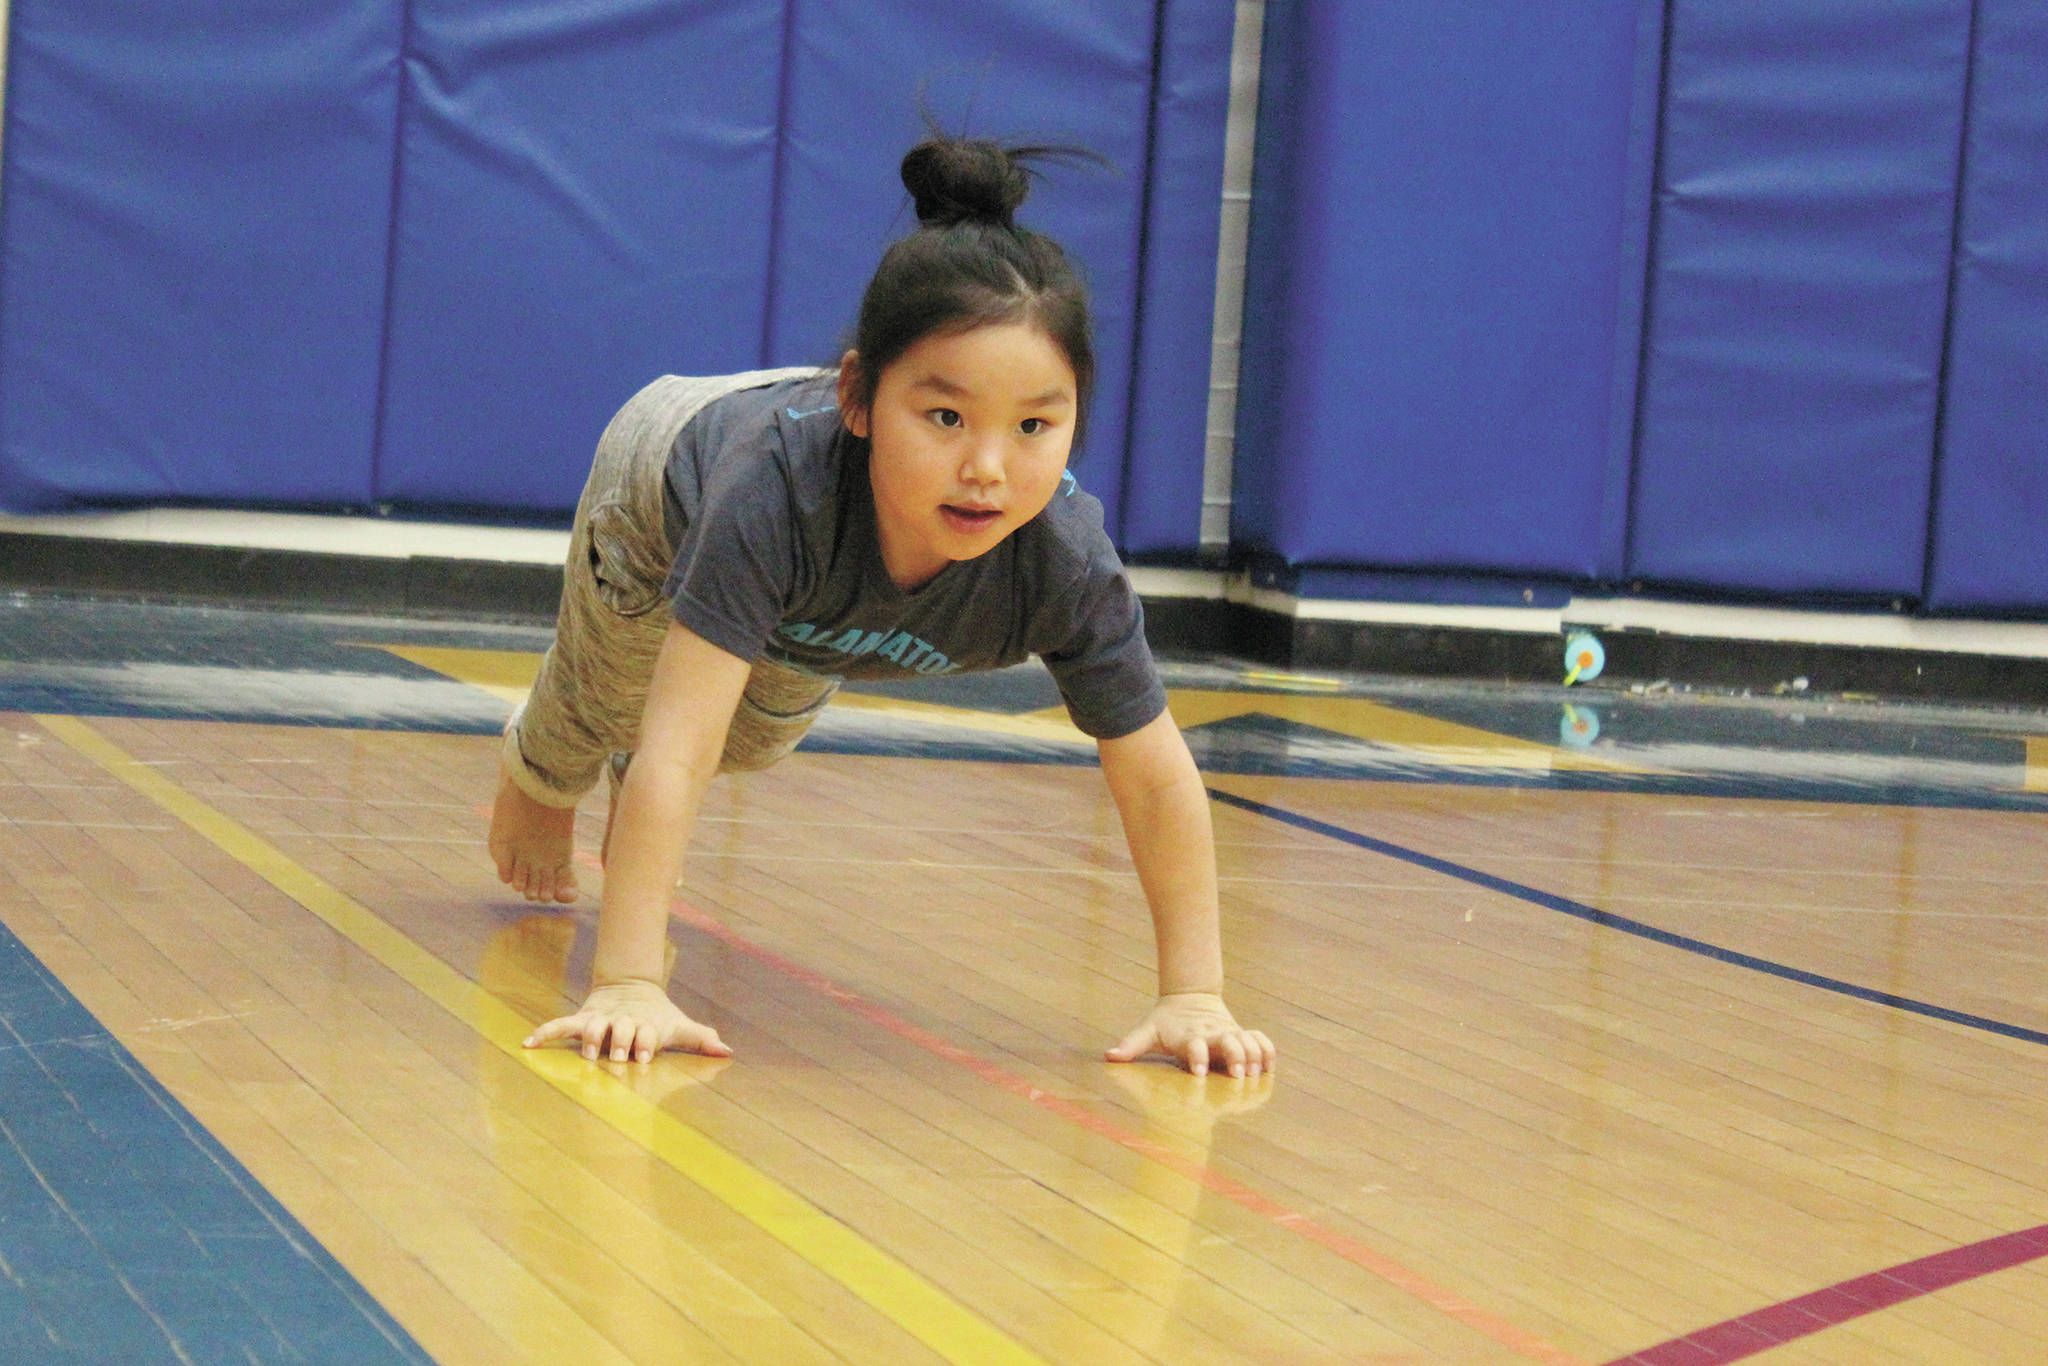 Kyree Sagoonick competes in the seal jop for junior girls Saturday, March 7, 2020 during the Kachemak Bay Traditional Games at Homer High School in Homer, Alaska. (Photo by Megan Pacer/Homer News)